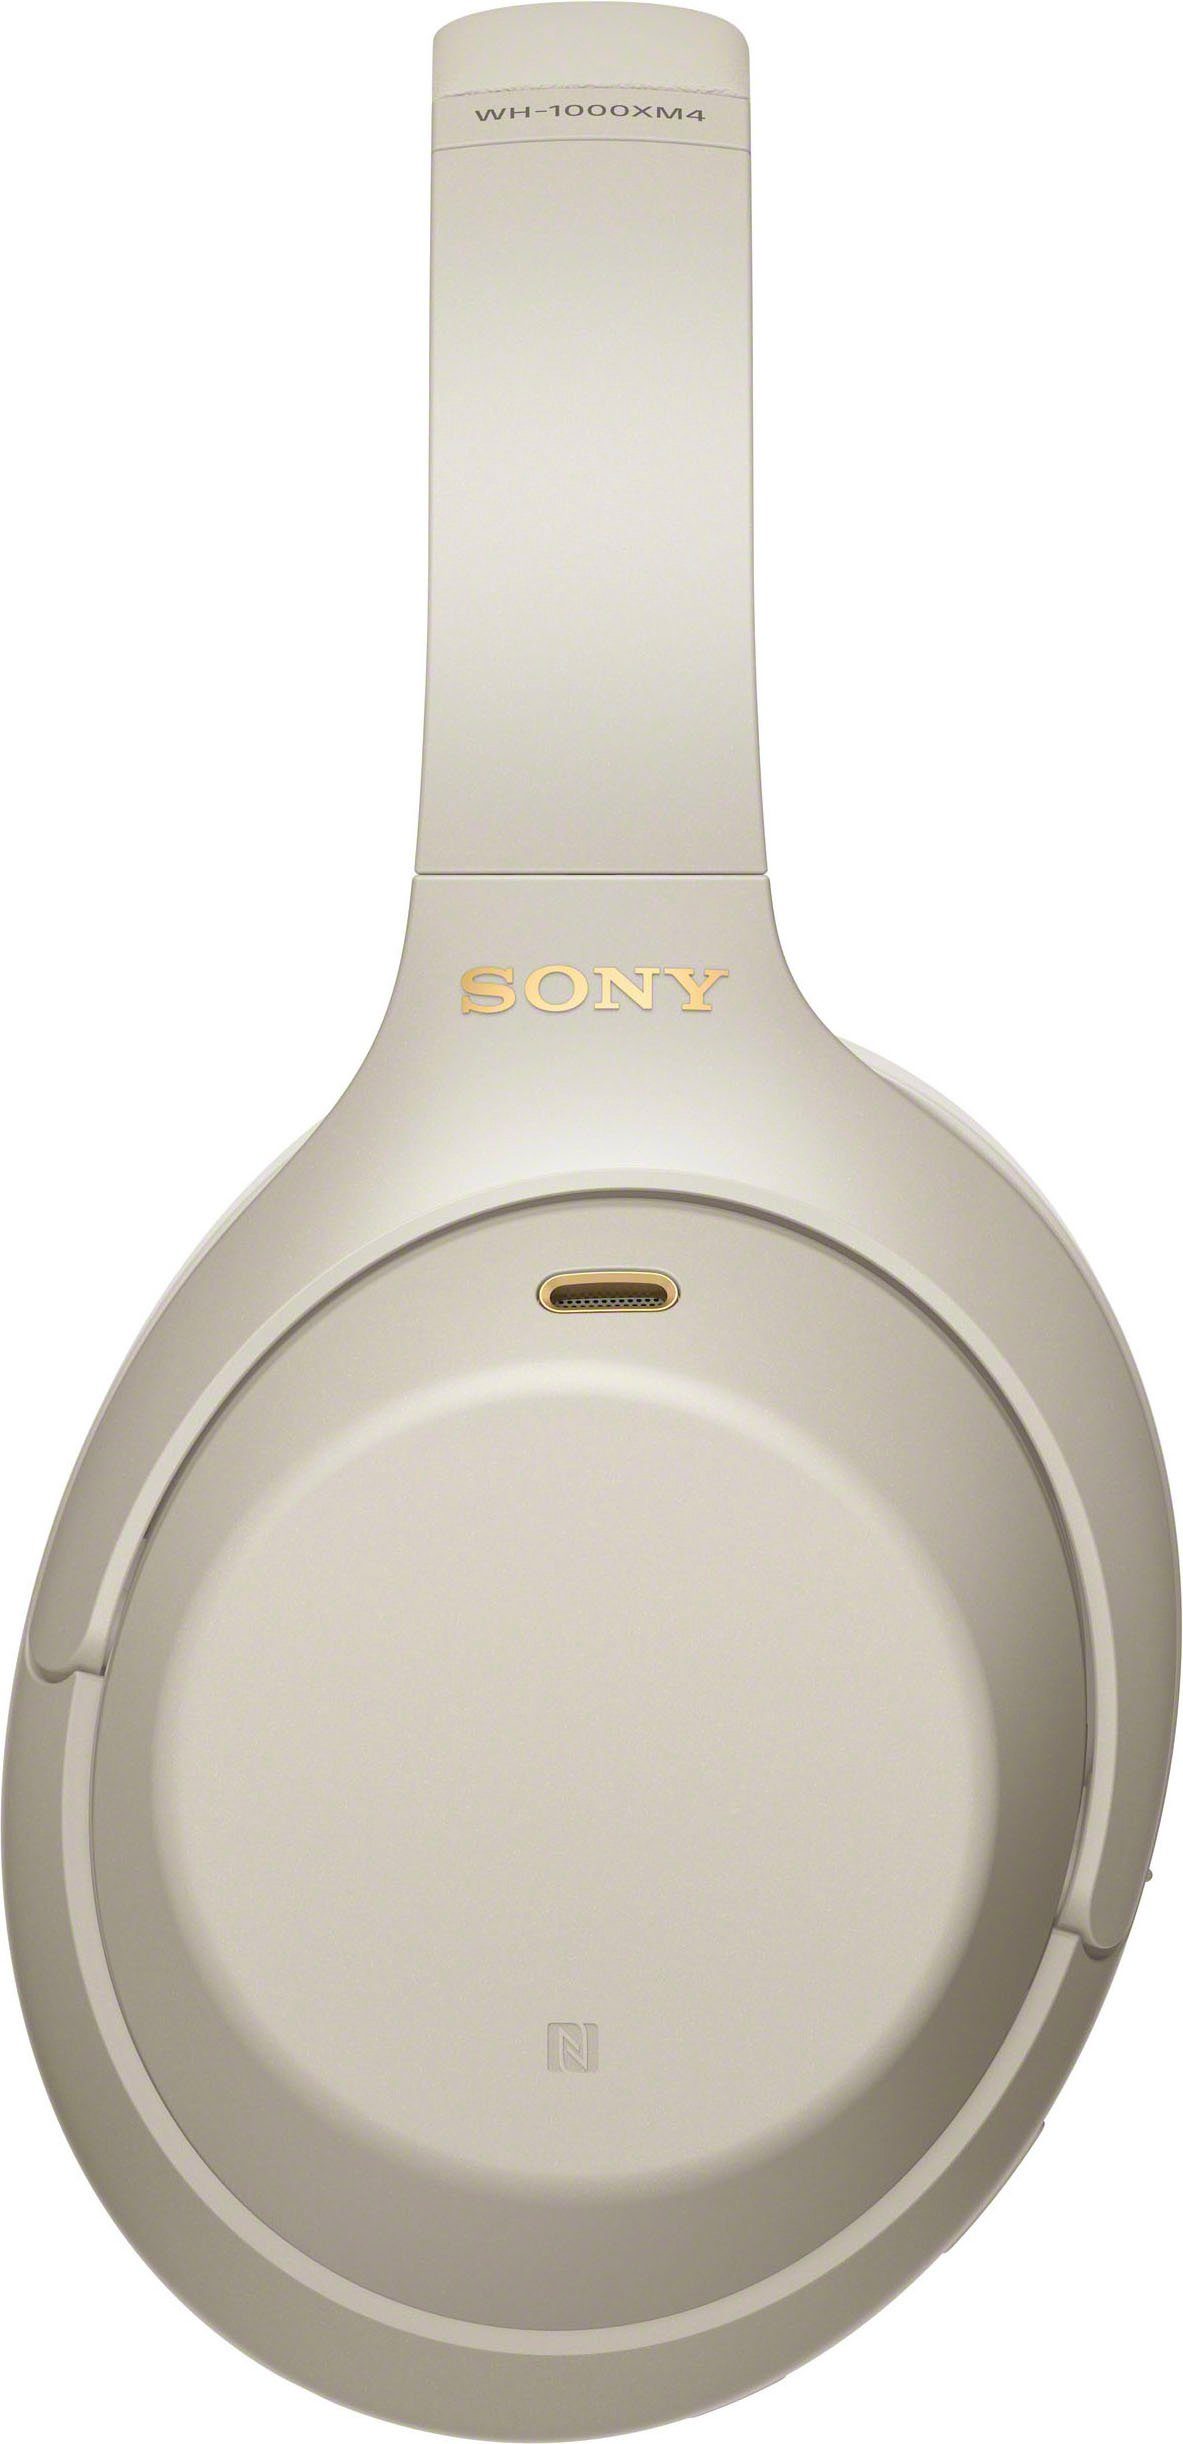 kabelloser WH-1000XM4 NFC, Verbindung One-Touch Silber Schnellladefunktion) Sony (Noise-Cancelling, via Over-Ear-Kopfhörer Bluetooth, NFC, Touch Sensor,